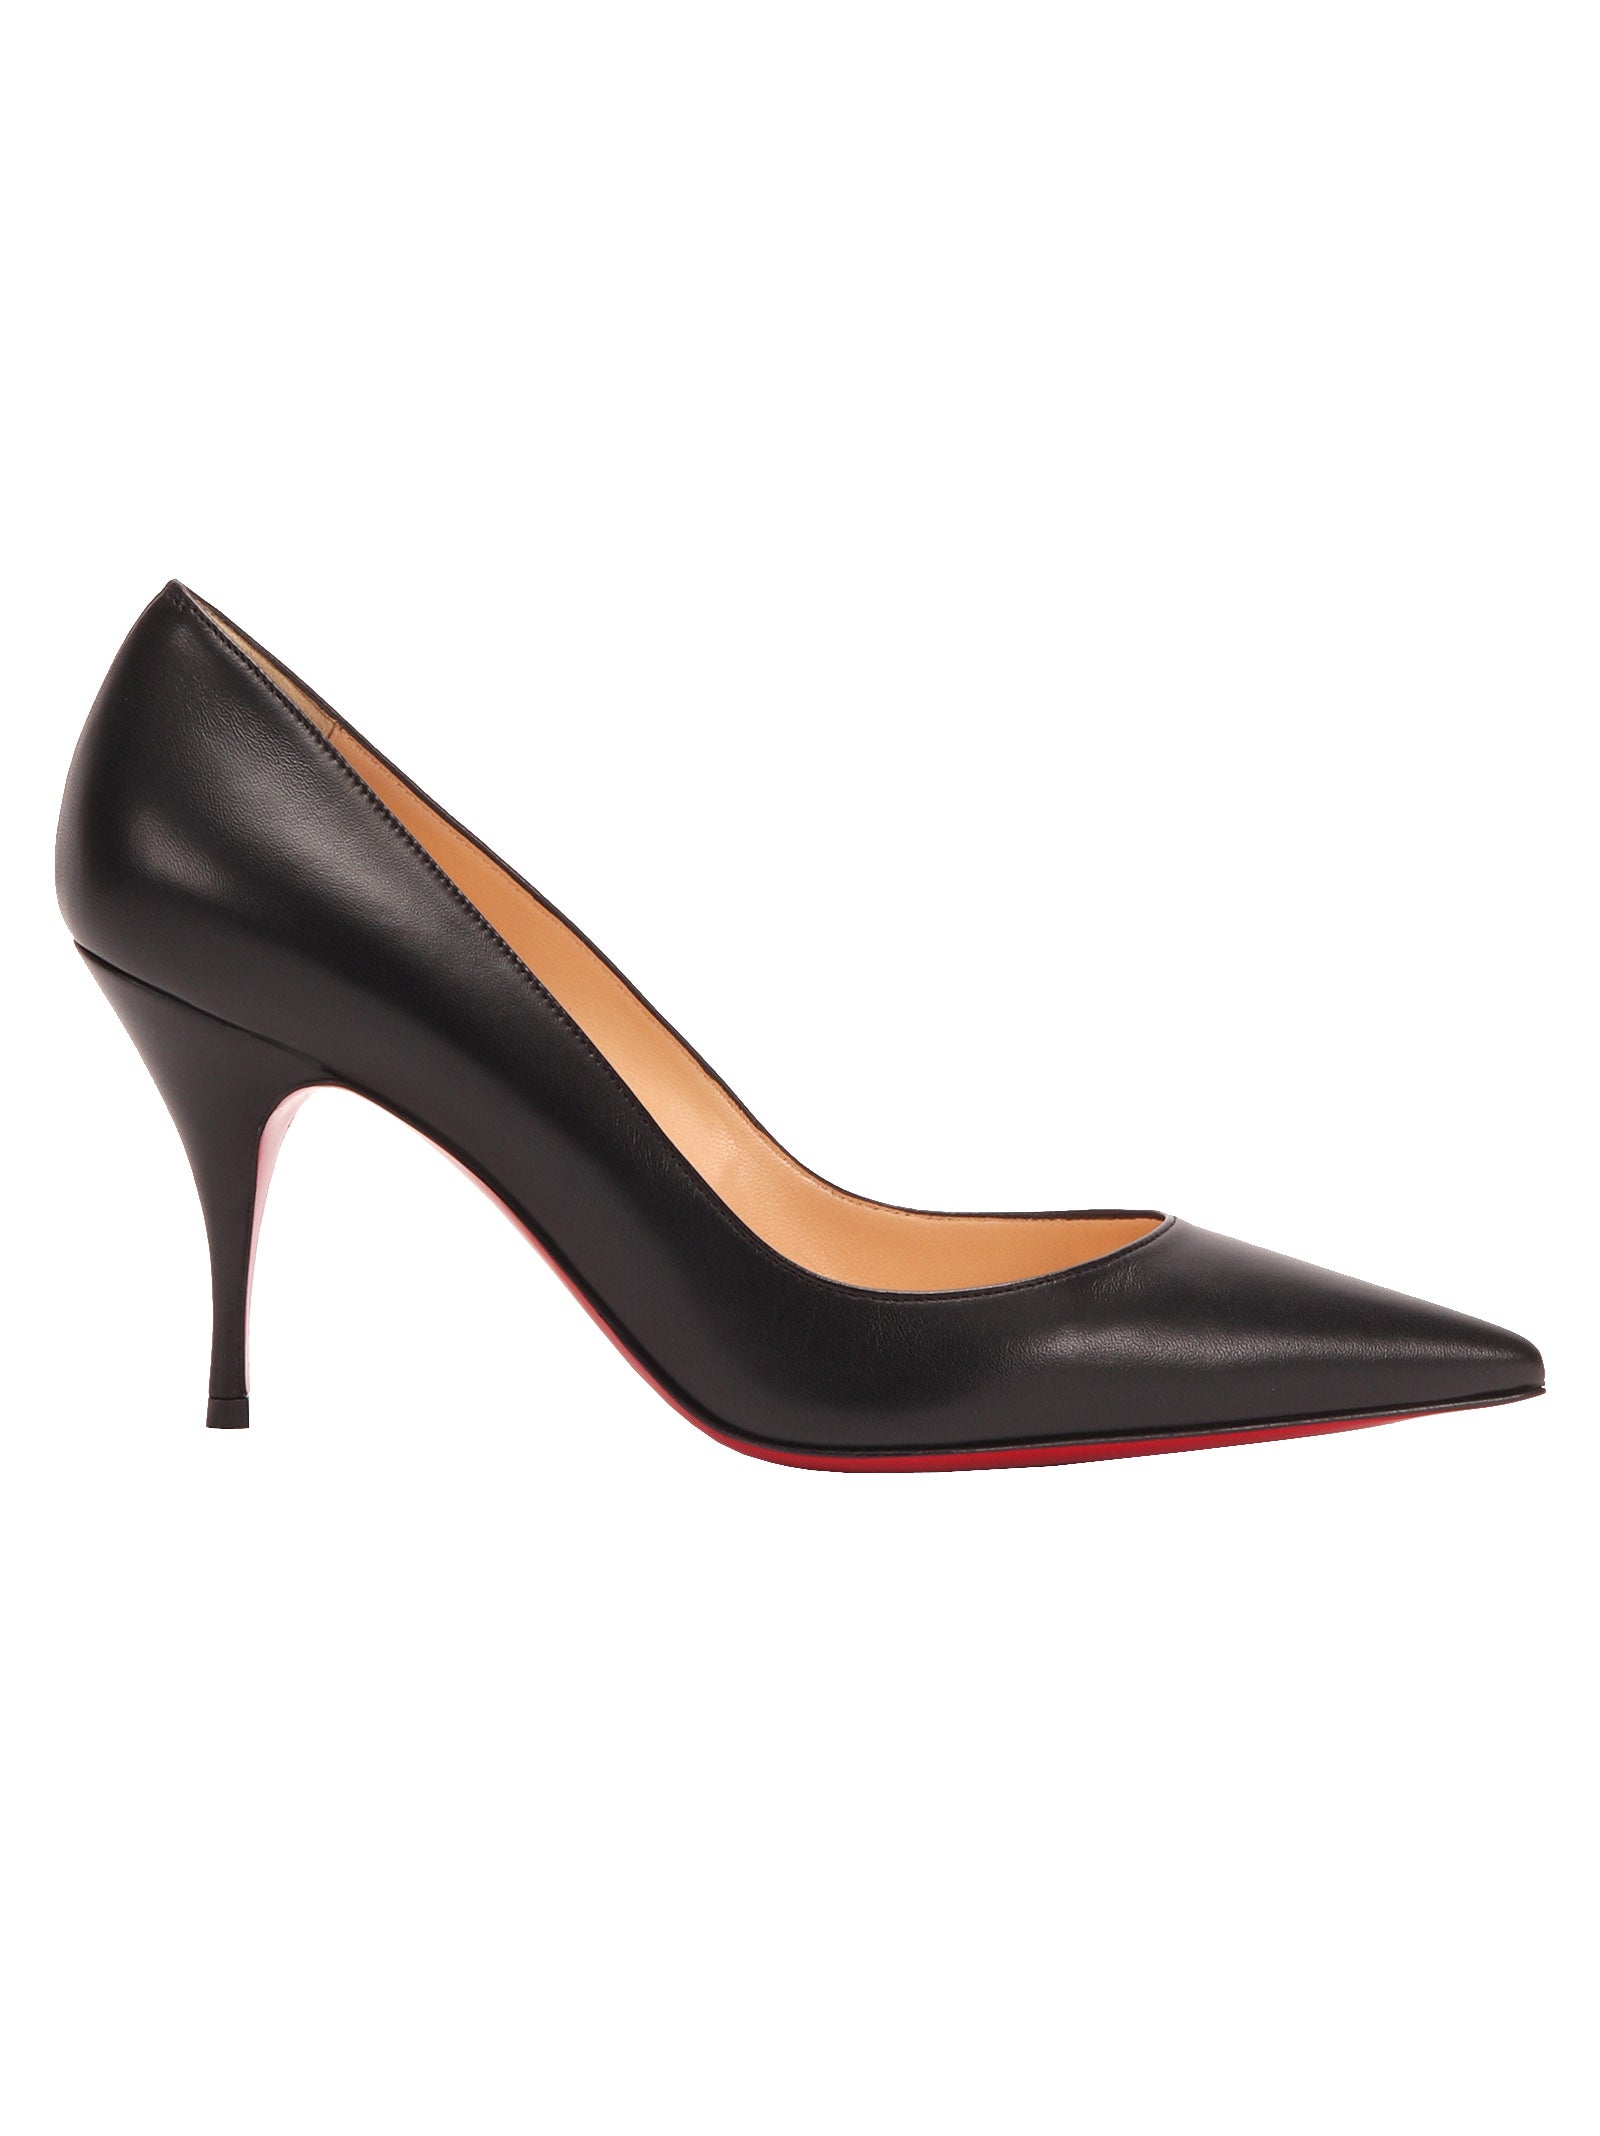 Christian Louboutin Clare Pointed Toe Pumps In Black